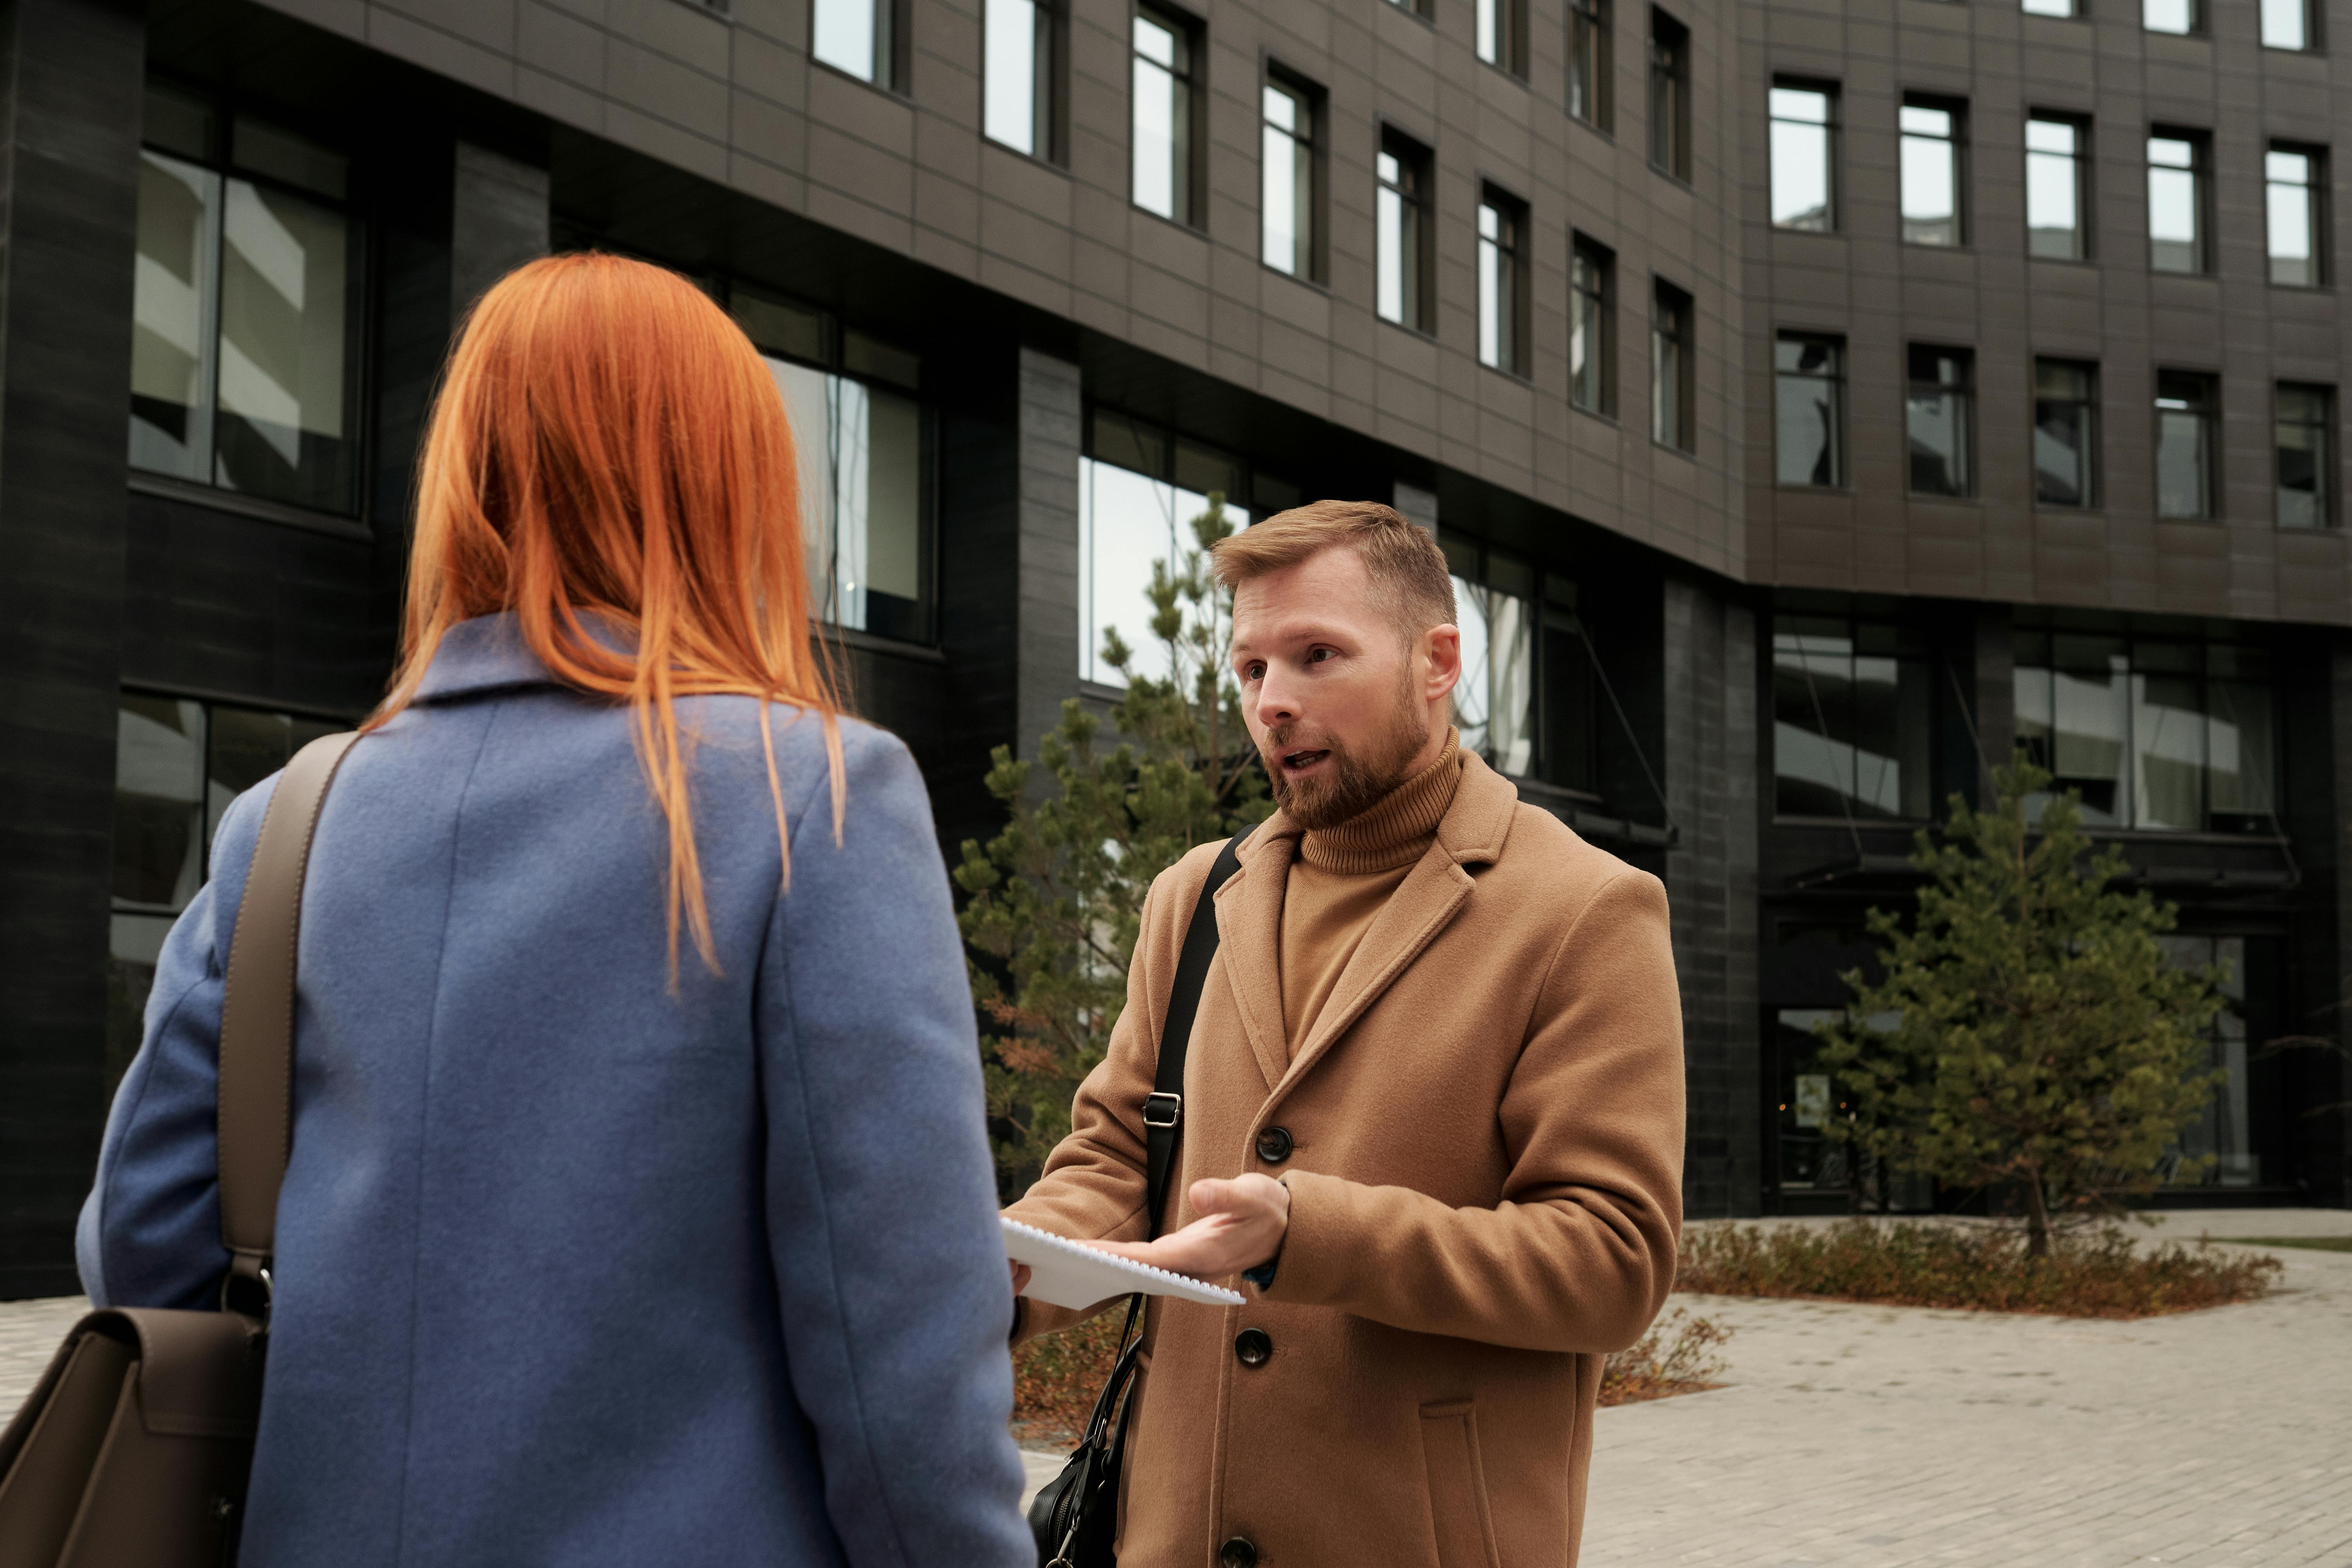 A man and a woman having a serious discussion outside a building | Source: Pexels